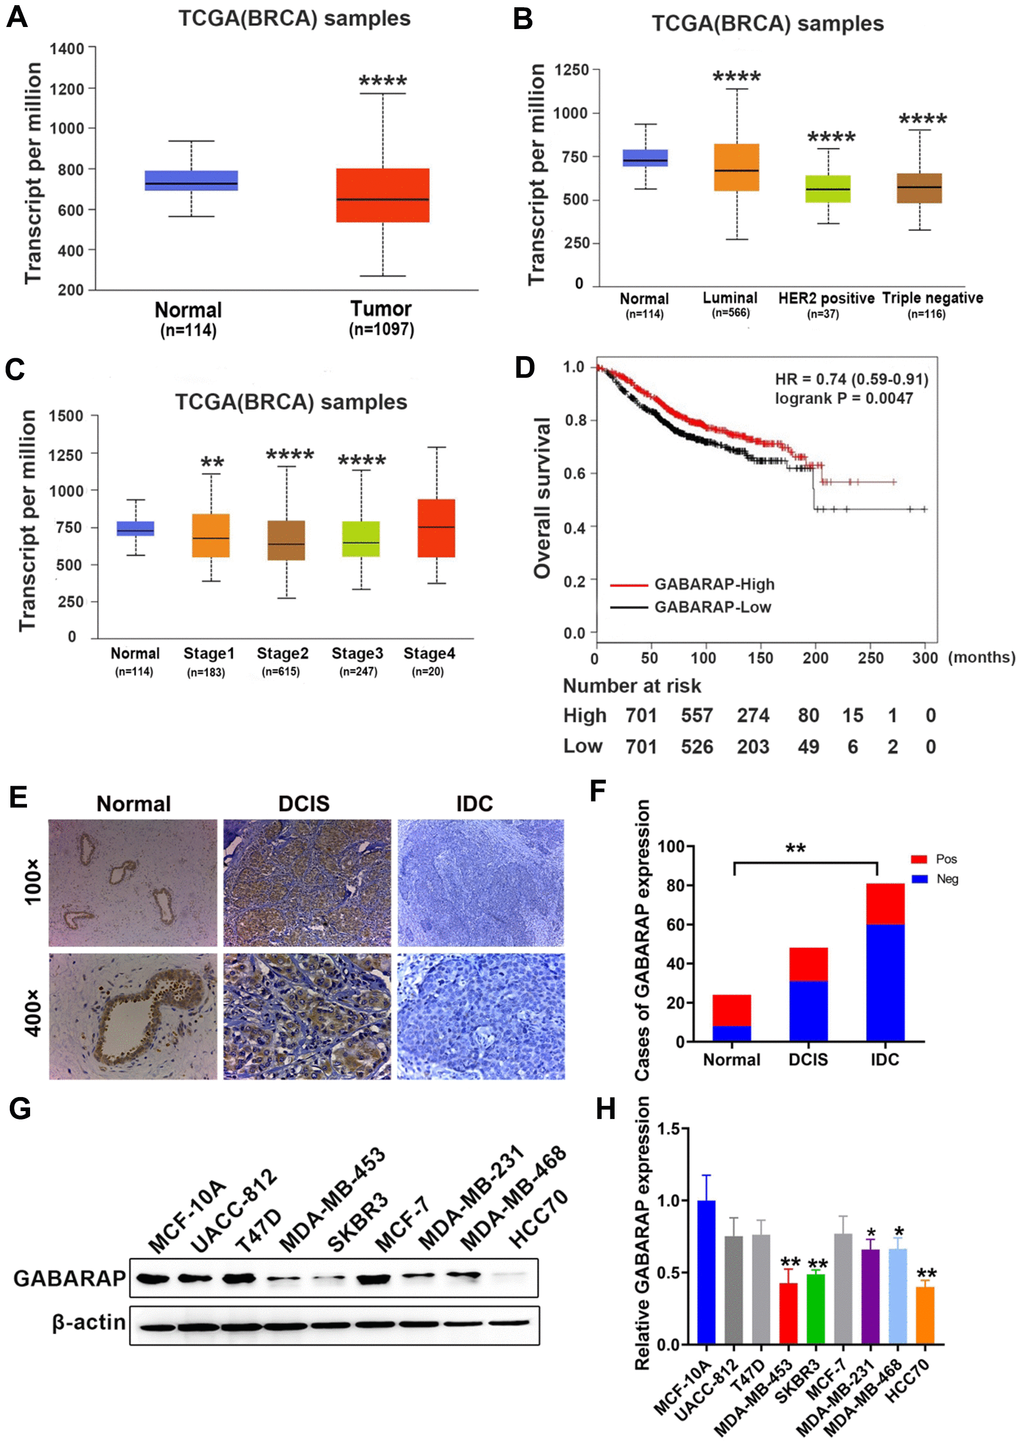 GABARAP is downregulated in breast cancer specimens and cell lines. (A) Expression profile of GABARAP in primary breast cancer tissues (n = 1097) and normal breast tissues (n = 114) (TCGA). (B) Expression of GABARAP in BRCA based on breast cancer subclasses (TCGA). (C) Expression of GABARAP in BRCA based on individual cancer stages (TCGA). (D) Overall survival of breast cancer patients according to GABARAP expression (TCGA). (E) Representative images of GABARAP immunohistochemical staining. (magnification, 100× and 400×). (F) Statistical significance of ‘positive’ or ‘negative’ GABARAP staining in 87 cases of IDC, 48 cases of DCIS and 24 cases of normal breast tissue. (G) Western blotting analysis of GABARAP expression in 8 human breast cancer cell lines and non-transformed MCF-10A cells. (H) Statistical significance of GABARAP expression in 8 human breast cancer cell lines and non-transformed MCF-10A cells. (*P P P P 